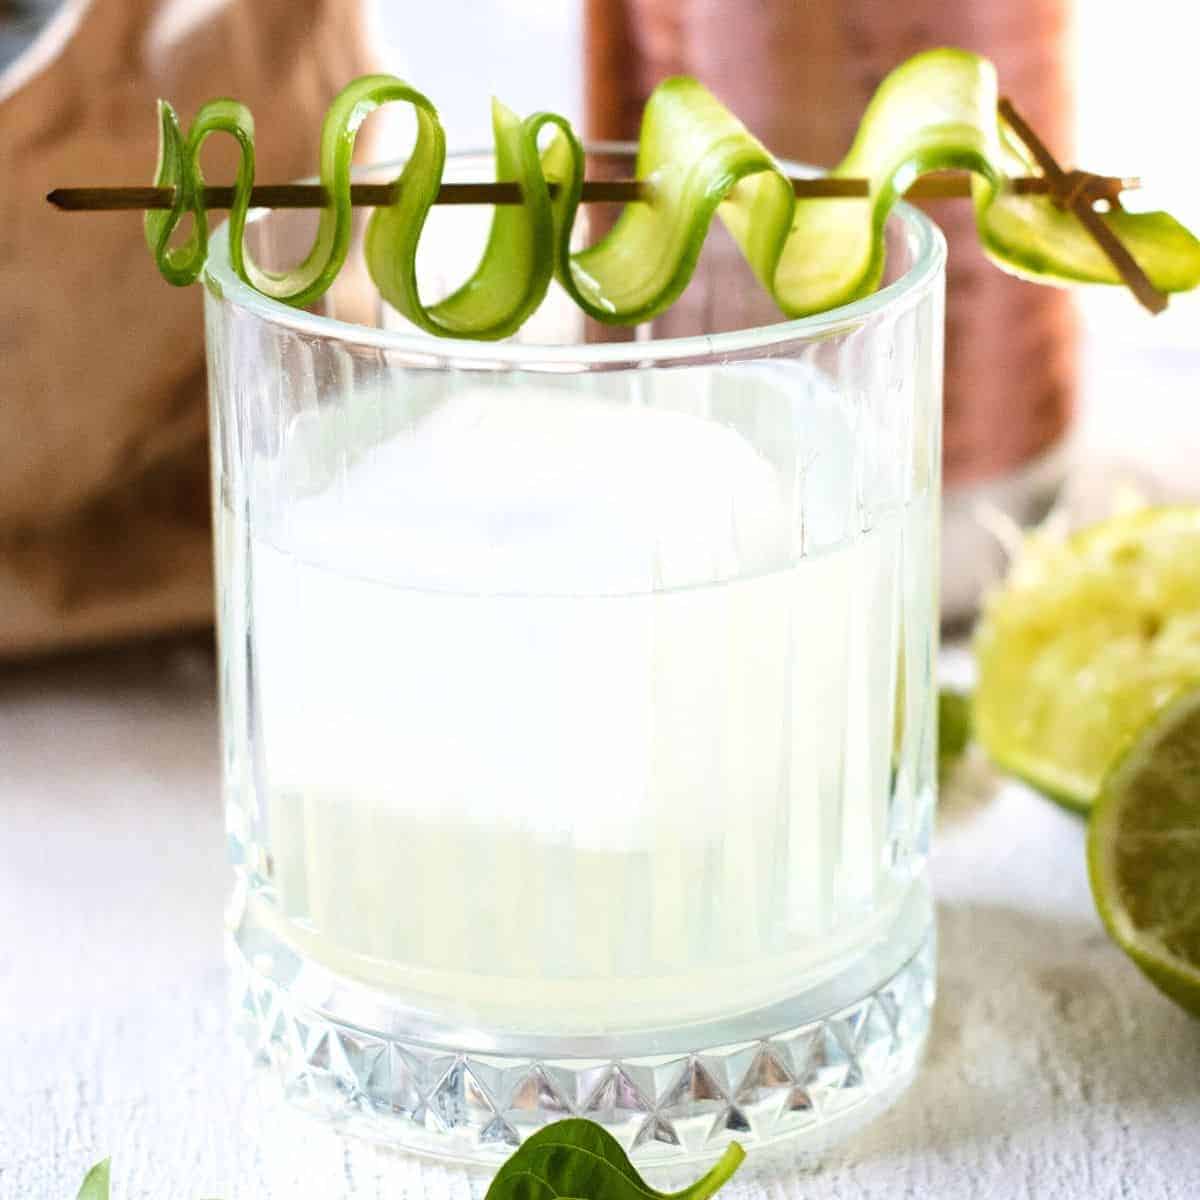 33 Keto Cocktails For Your Low-Carb Lifestyle